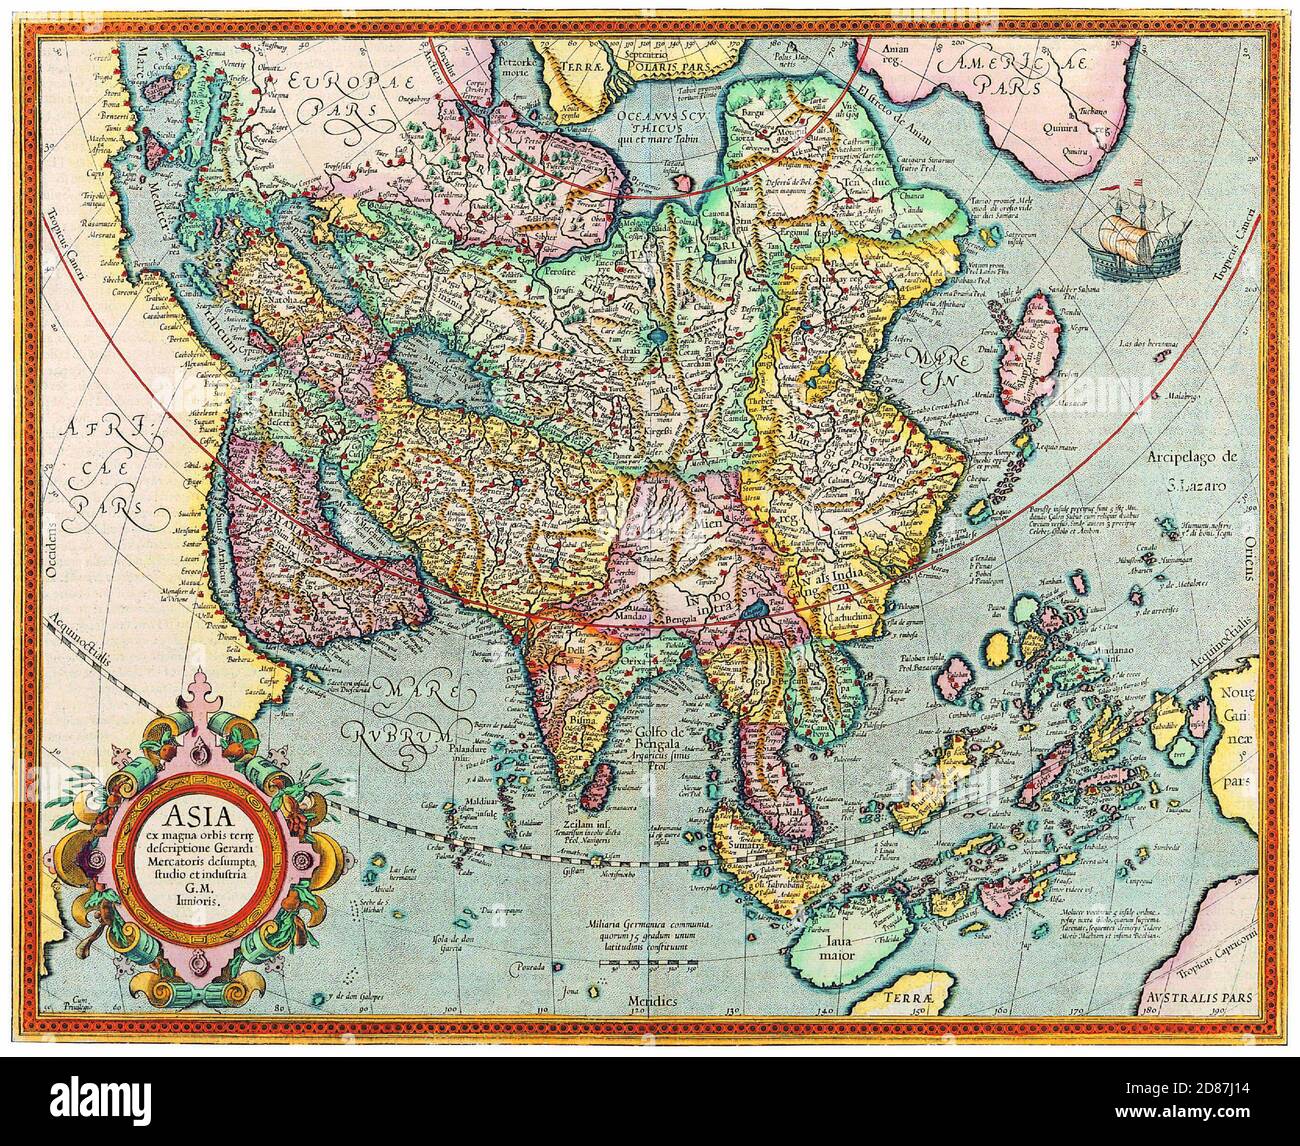 Mercator's map of Asia. Mercator's World Map of 1569 including parts of Africa and Australia. Stock Photo